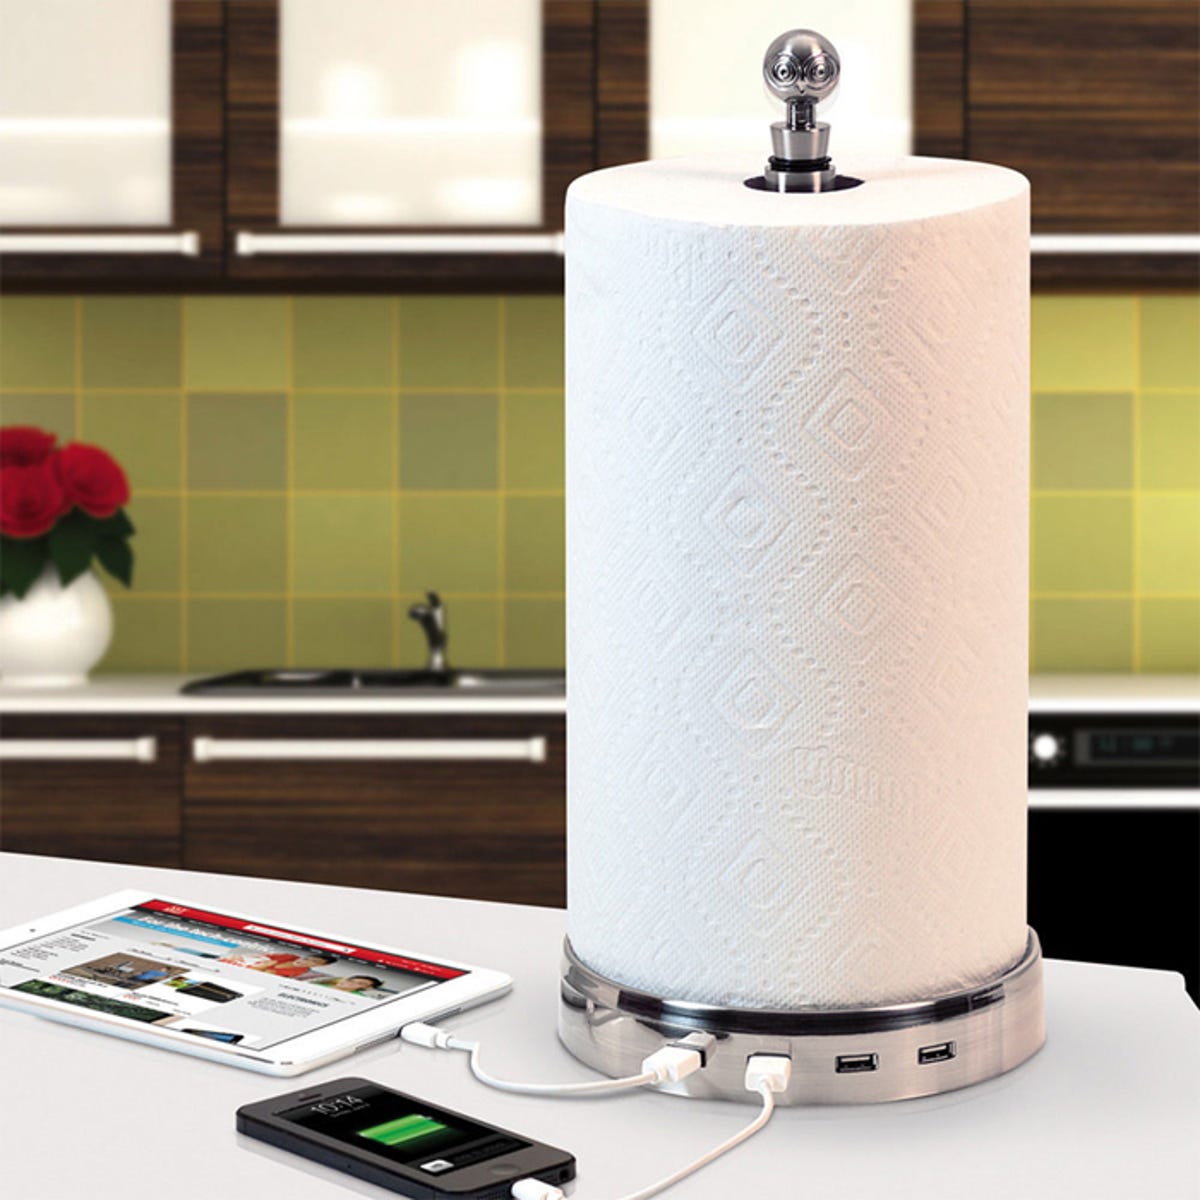 The TowlHub Paper Towel Holder does much more than hold paper towels. Much, much more.